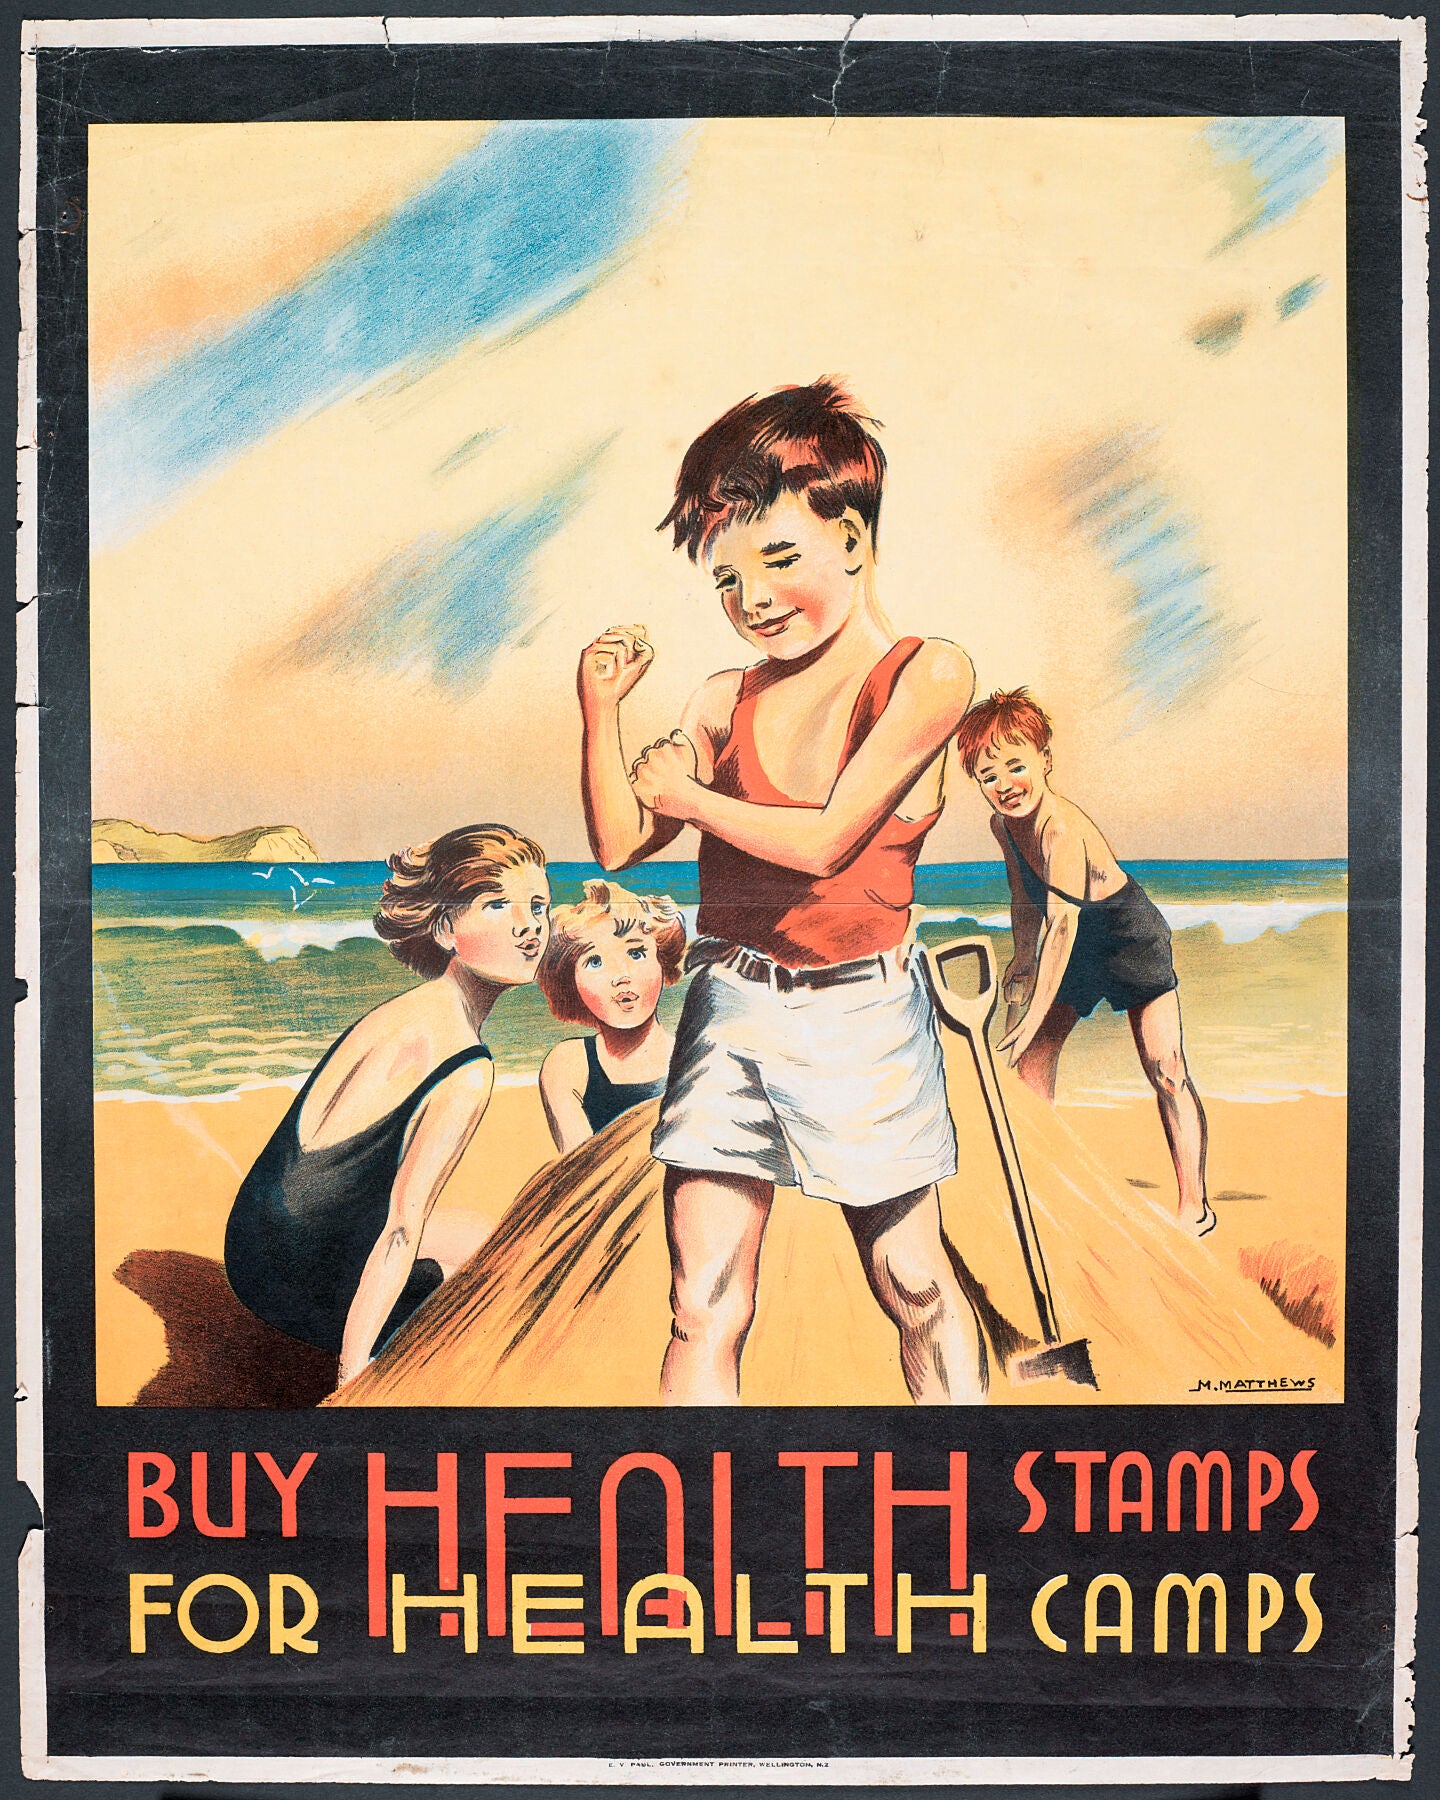 Poster, 'Buy Health Stamps', 1932, New Zealand, by Marmaduke Matthews